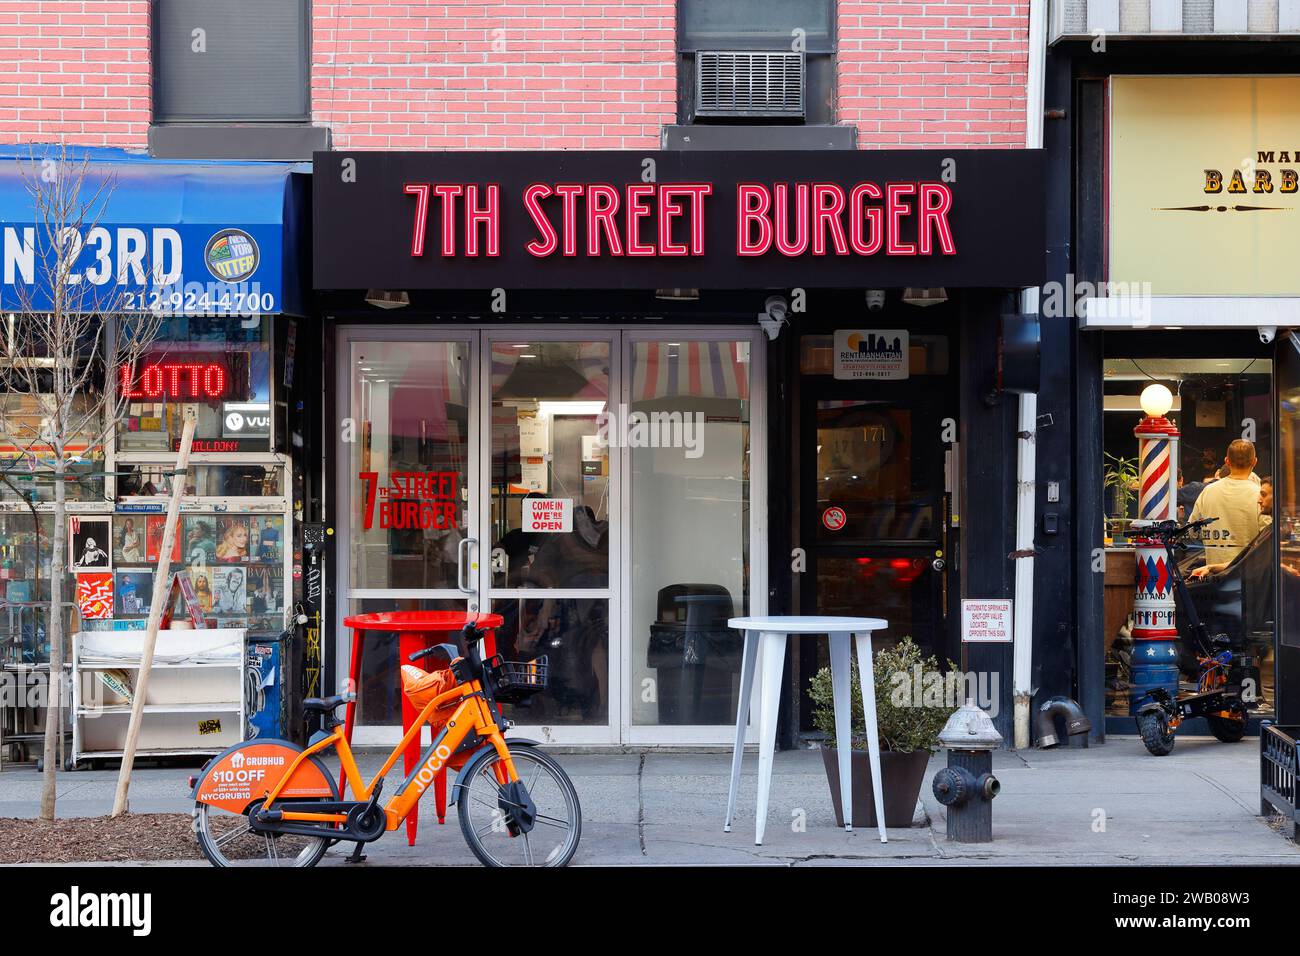 7th Street Burger, 171 W 23rd St, New York, NYC storefront photo of a fast food smash burger restaurant in Manhattan's Chelsea neighborhood. Stock Photo